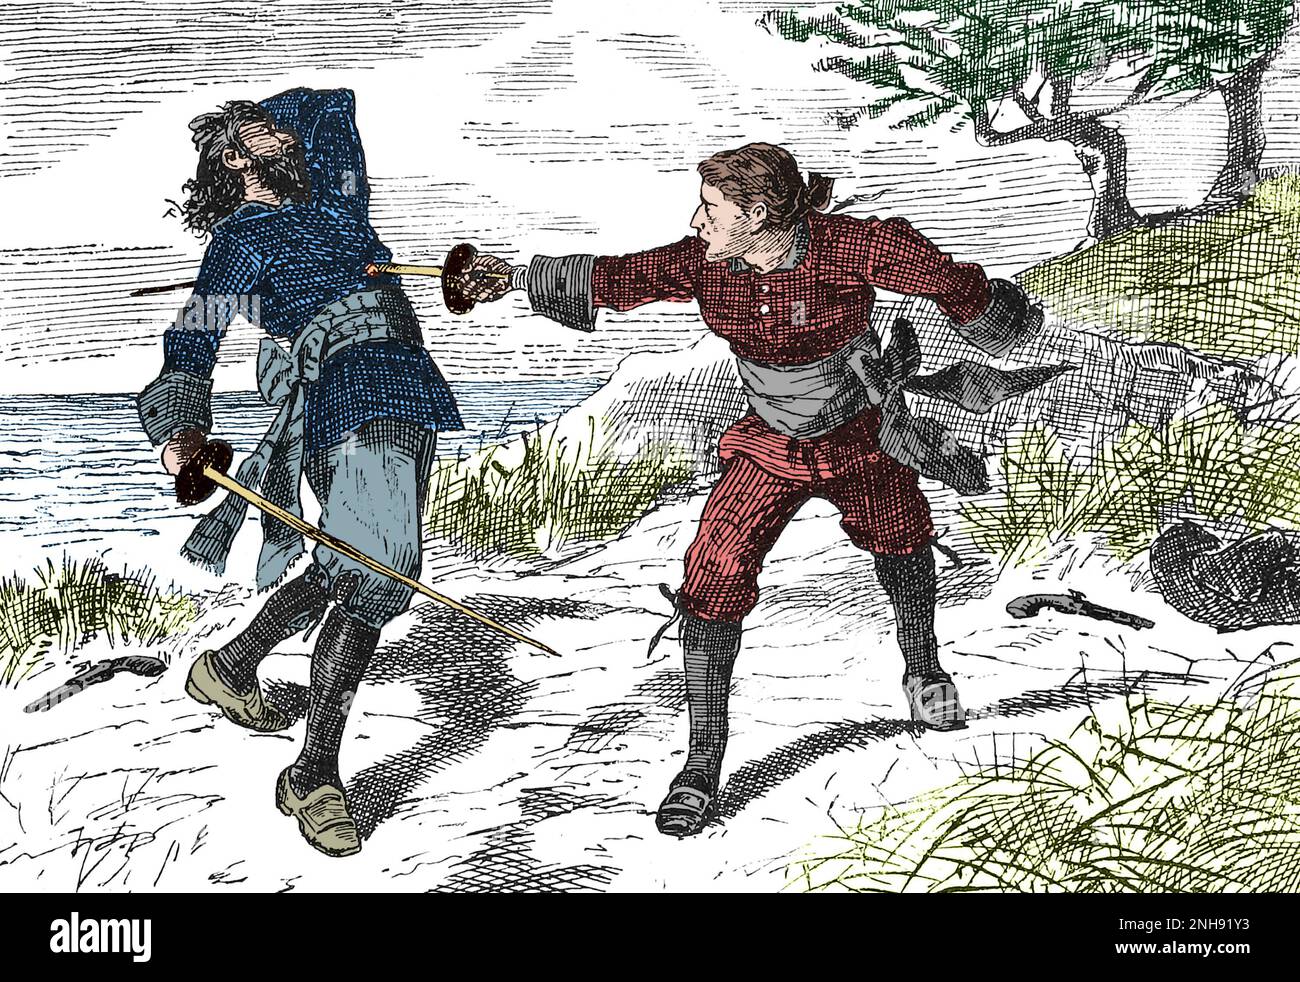 Irish pirate Anne Bonny (1697-1721) disguised as a man, killing another sailor in a duel. Illustration John Abbott, 1874. Colorized. Stock Photo